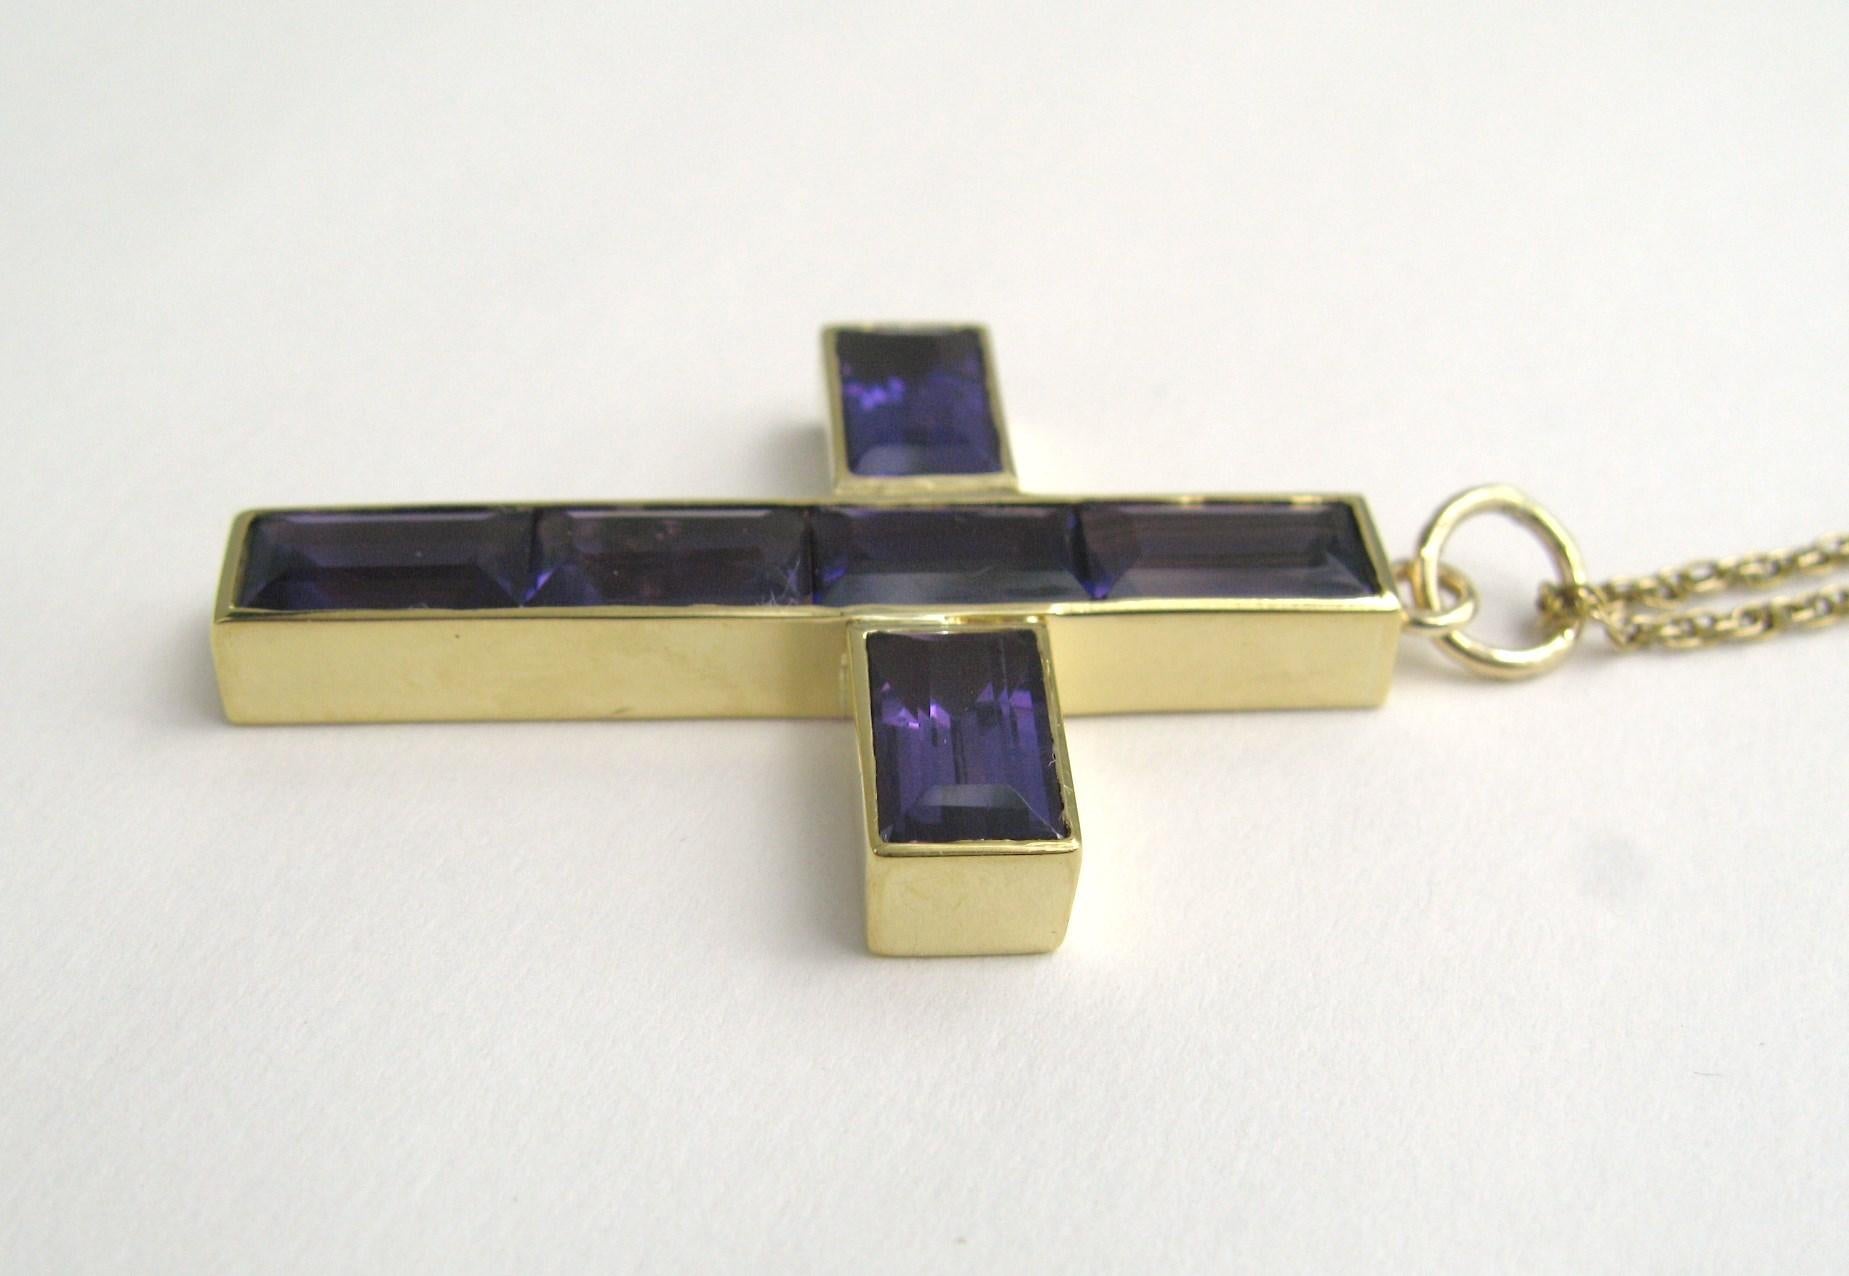 Stunning 14K gold Cross with 6 channel set amethyst stones, Approximately 8.5 Carats. Cross measures 1.6